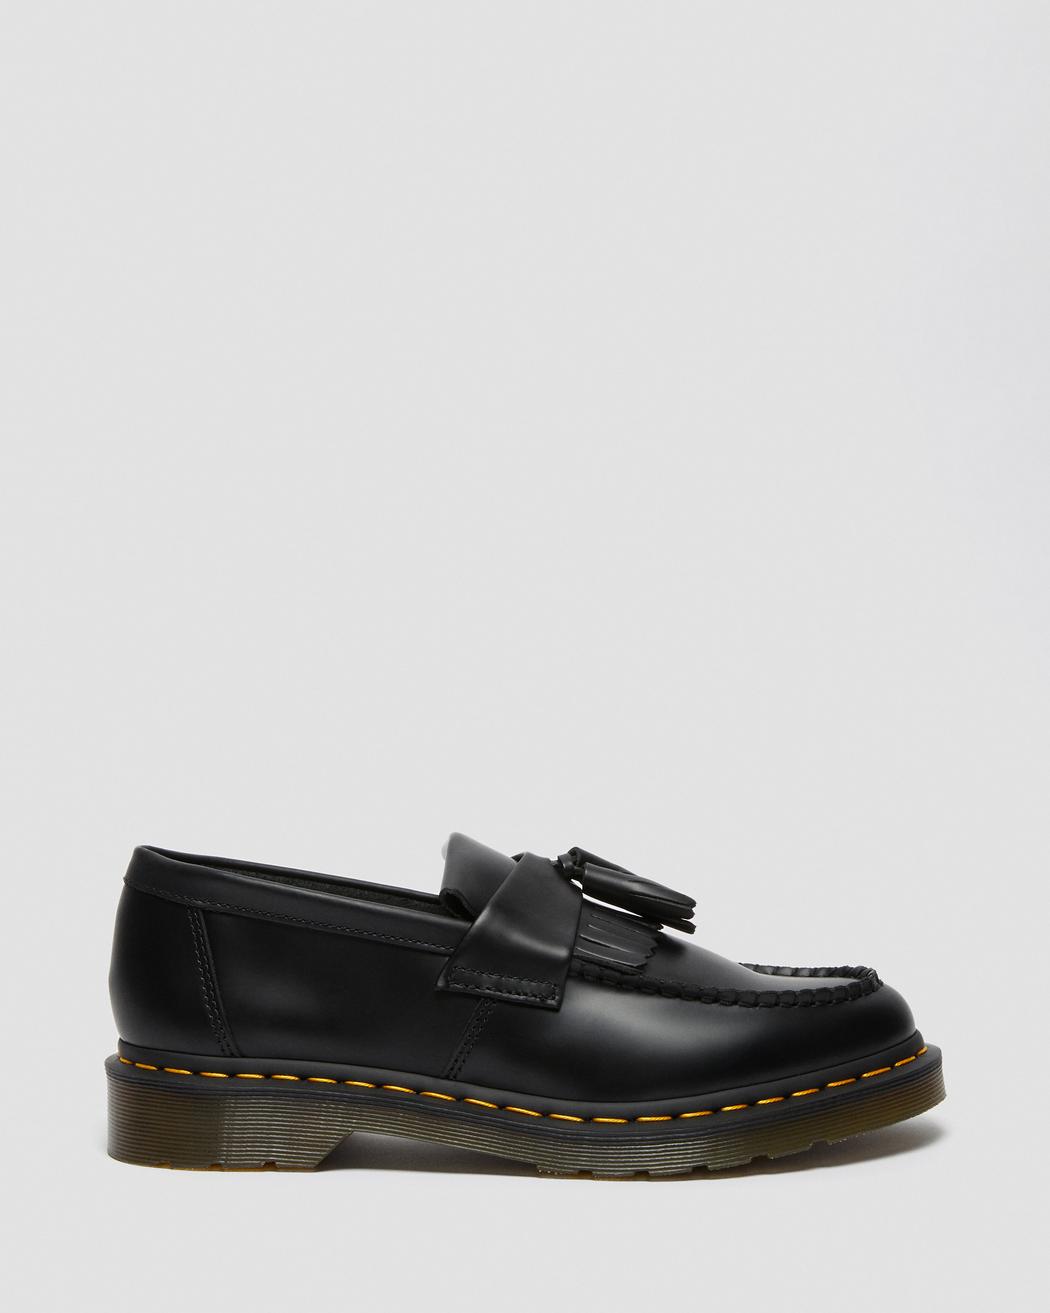 ADRIAN YELLOW STITCH LEATHER TASSEL LOAFERS – Posers Hollywood